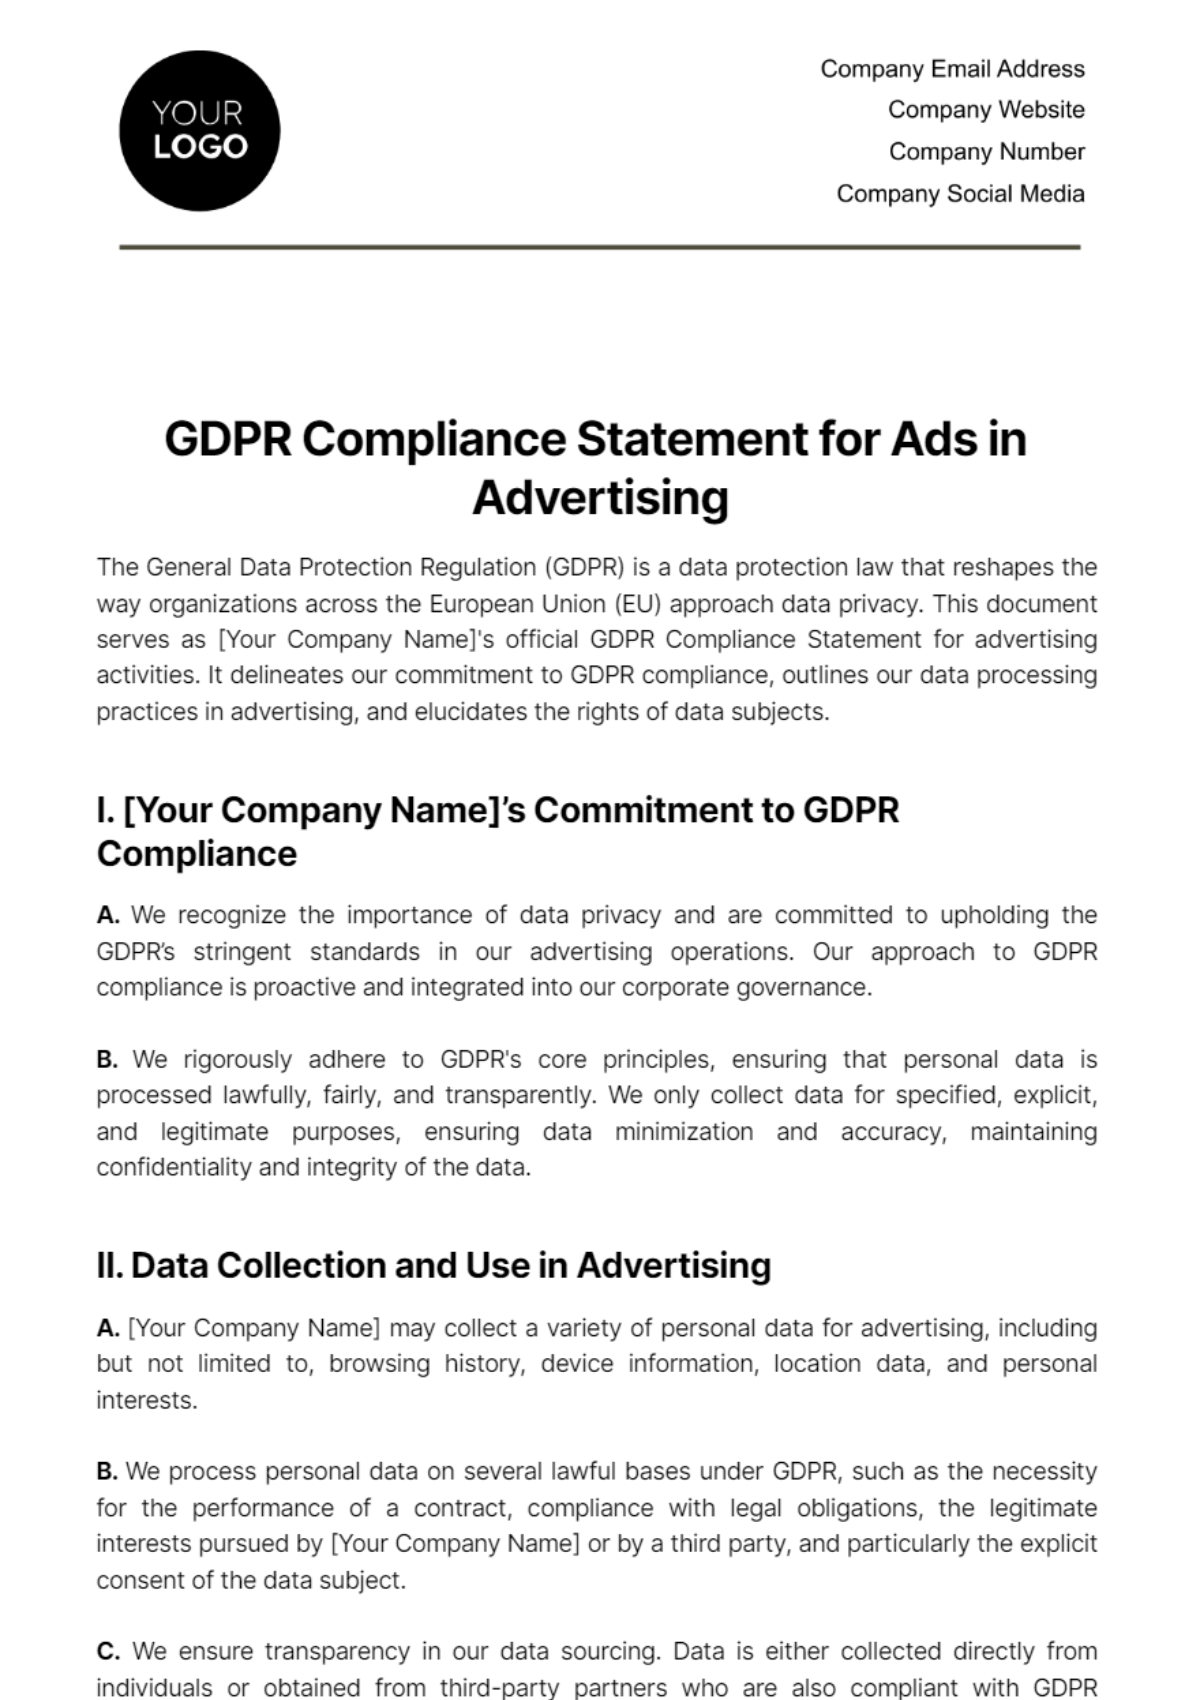 GDPR Compliance Statement for Ads in Advertising Template